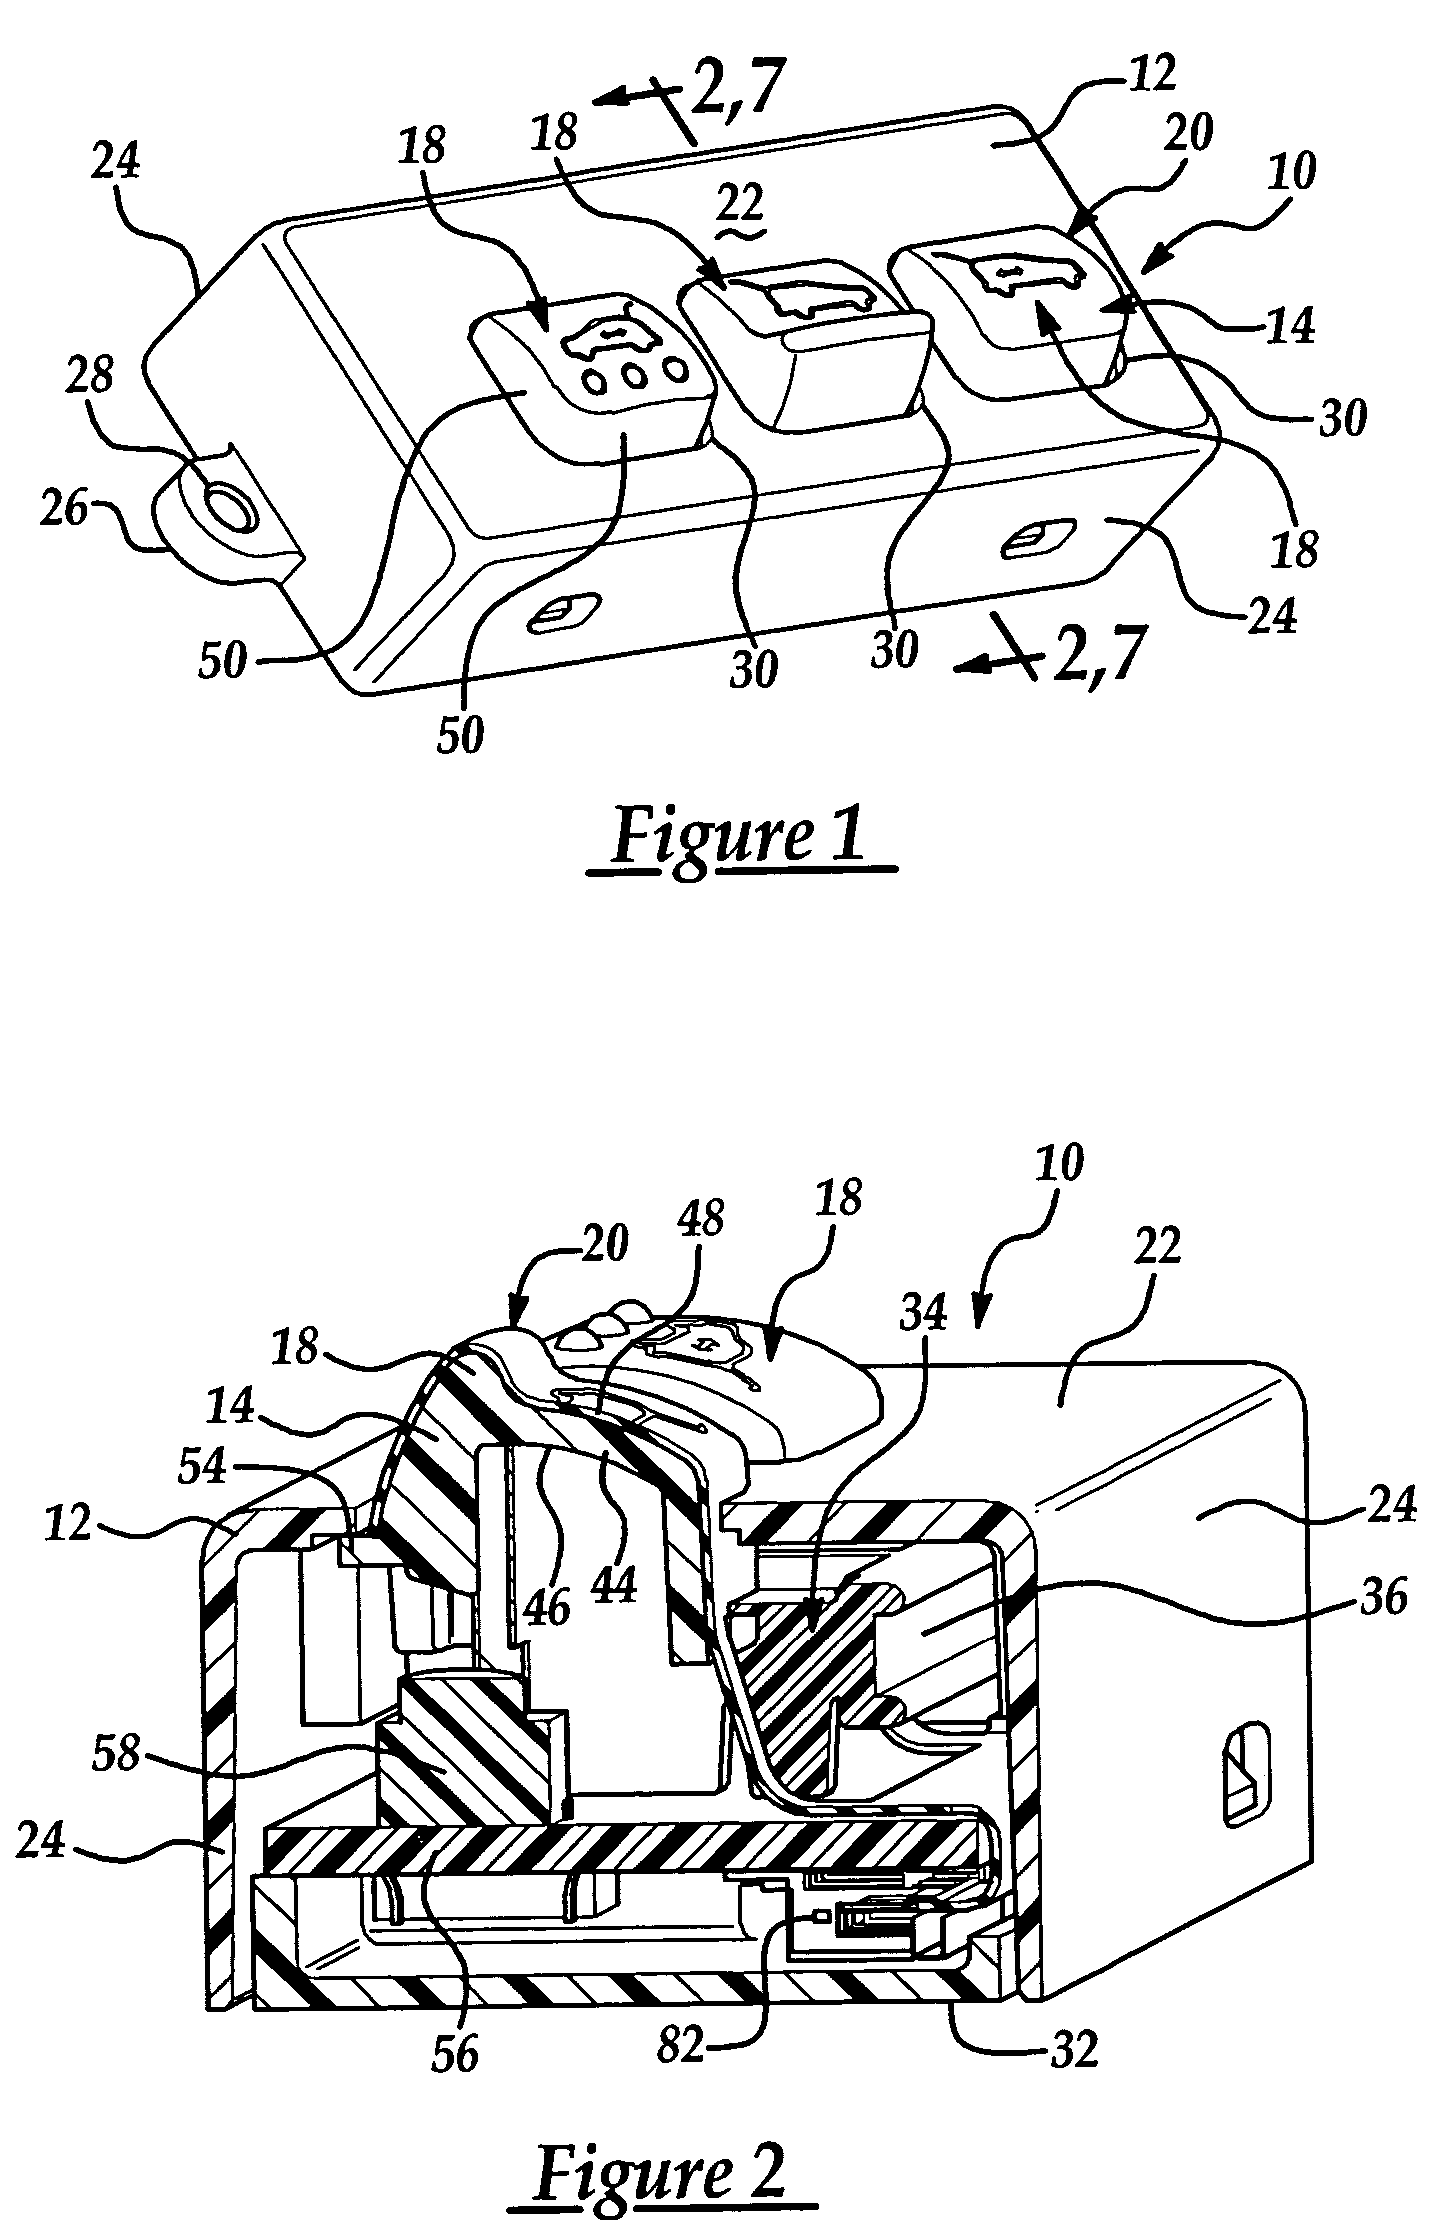 Control panel assembly with moveable illuminating button and method of making the same